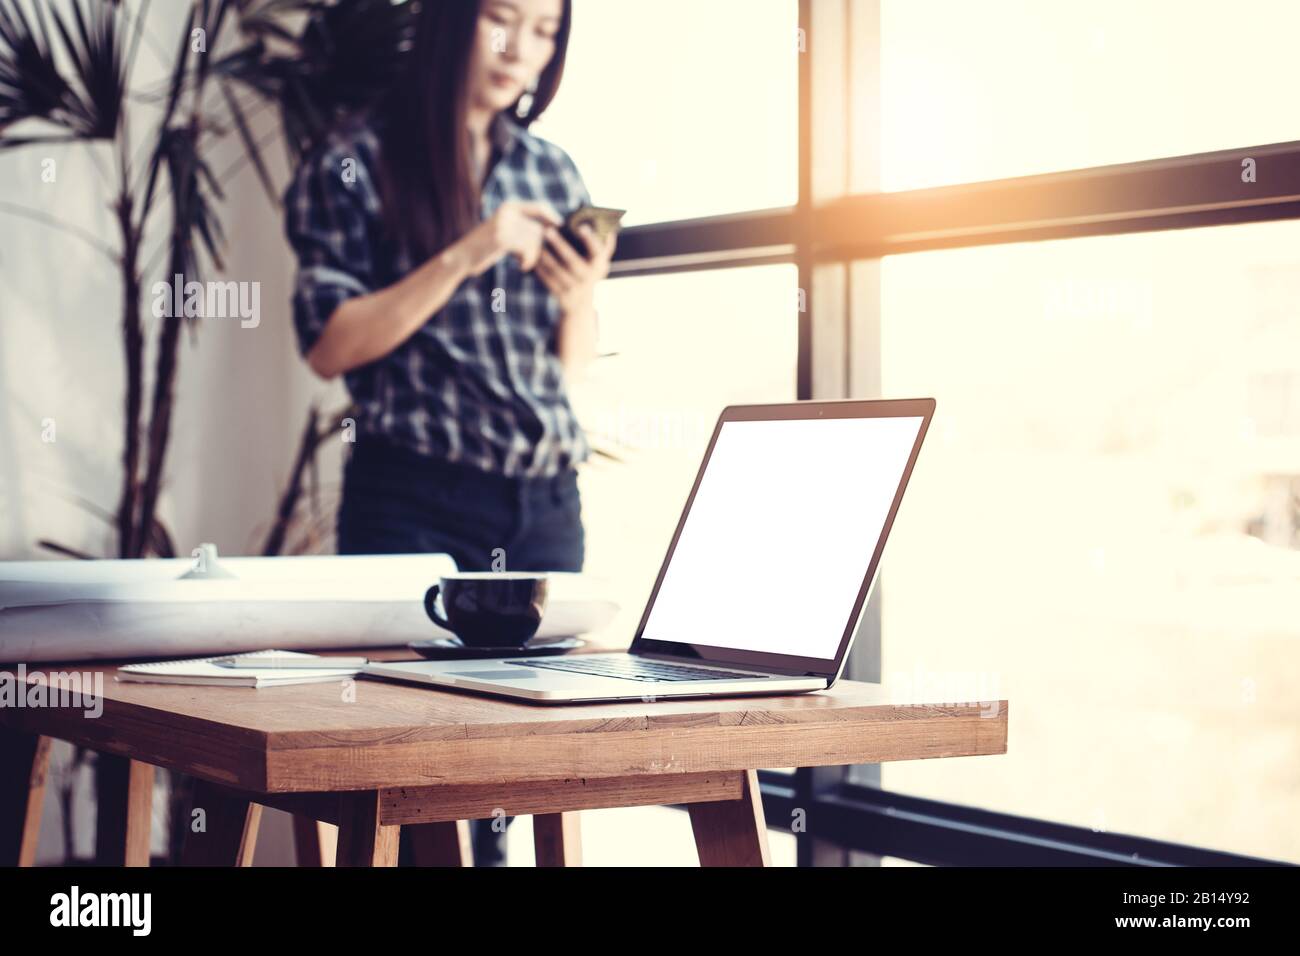 Technology in workplace concept. Young Asian business woman in modern office using the phone for work. Blank white screen laptop and blueprint on desk Stock Photo